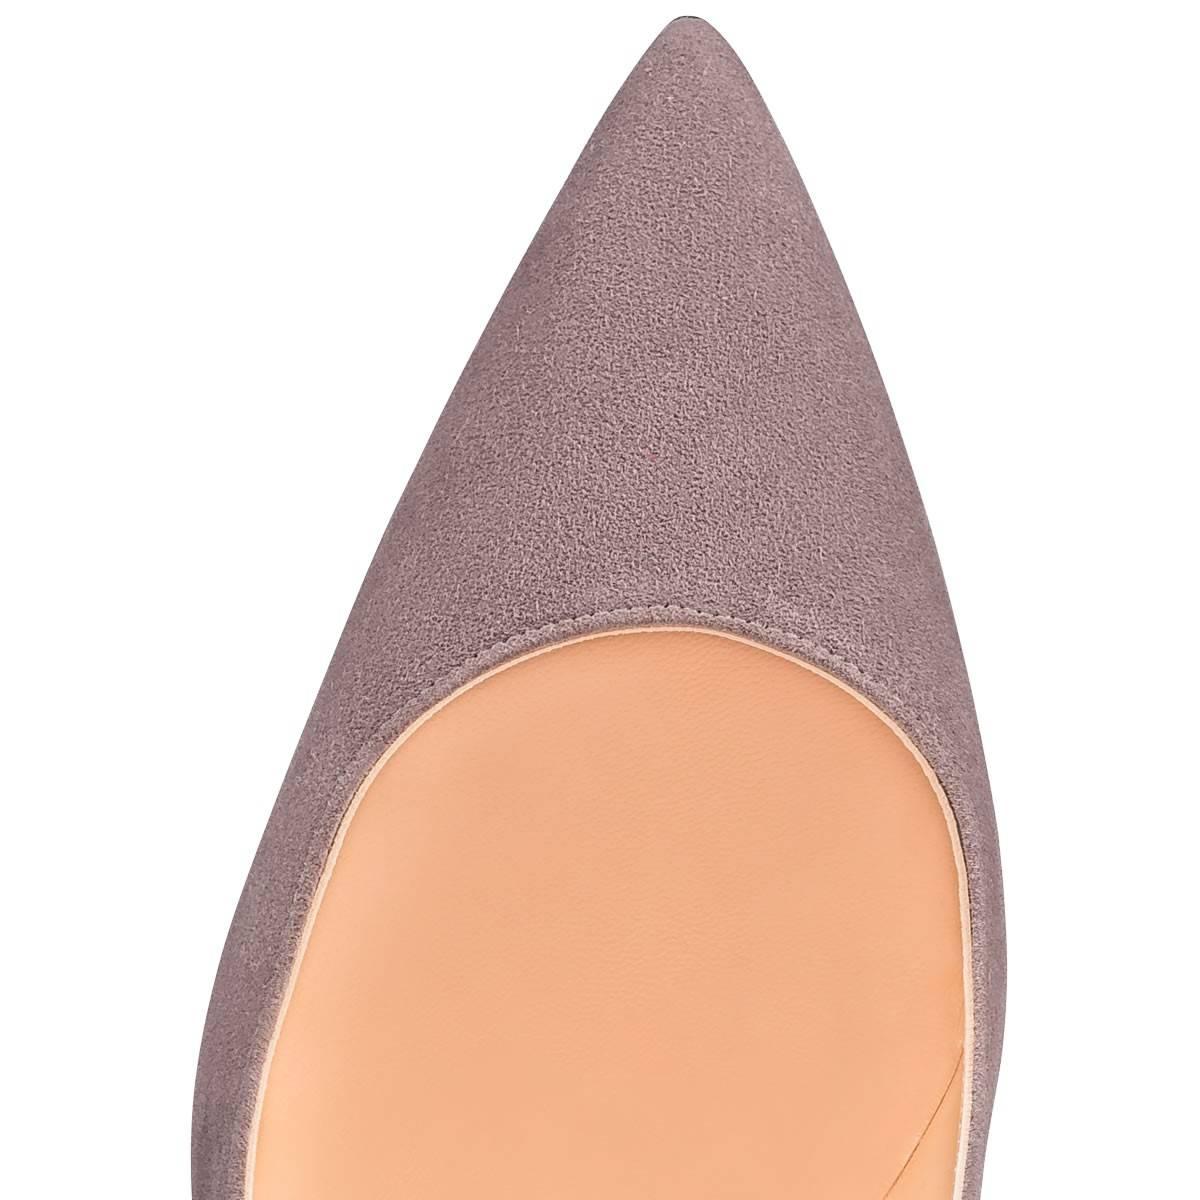 Christian Louboutin New Gray Suede So Kate High Heels Pumps in Box

Size IT 36.5
Suede
Slip on 
Made in Italy
Heel height 4.75" (120mm)
Includes original Christian Louboutin dust bag and box
